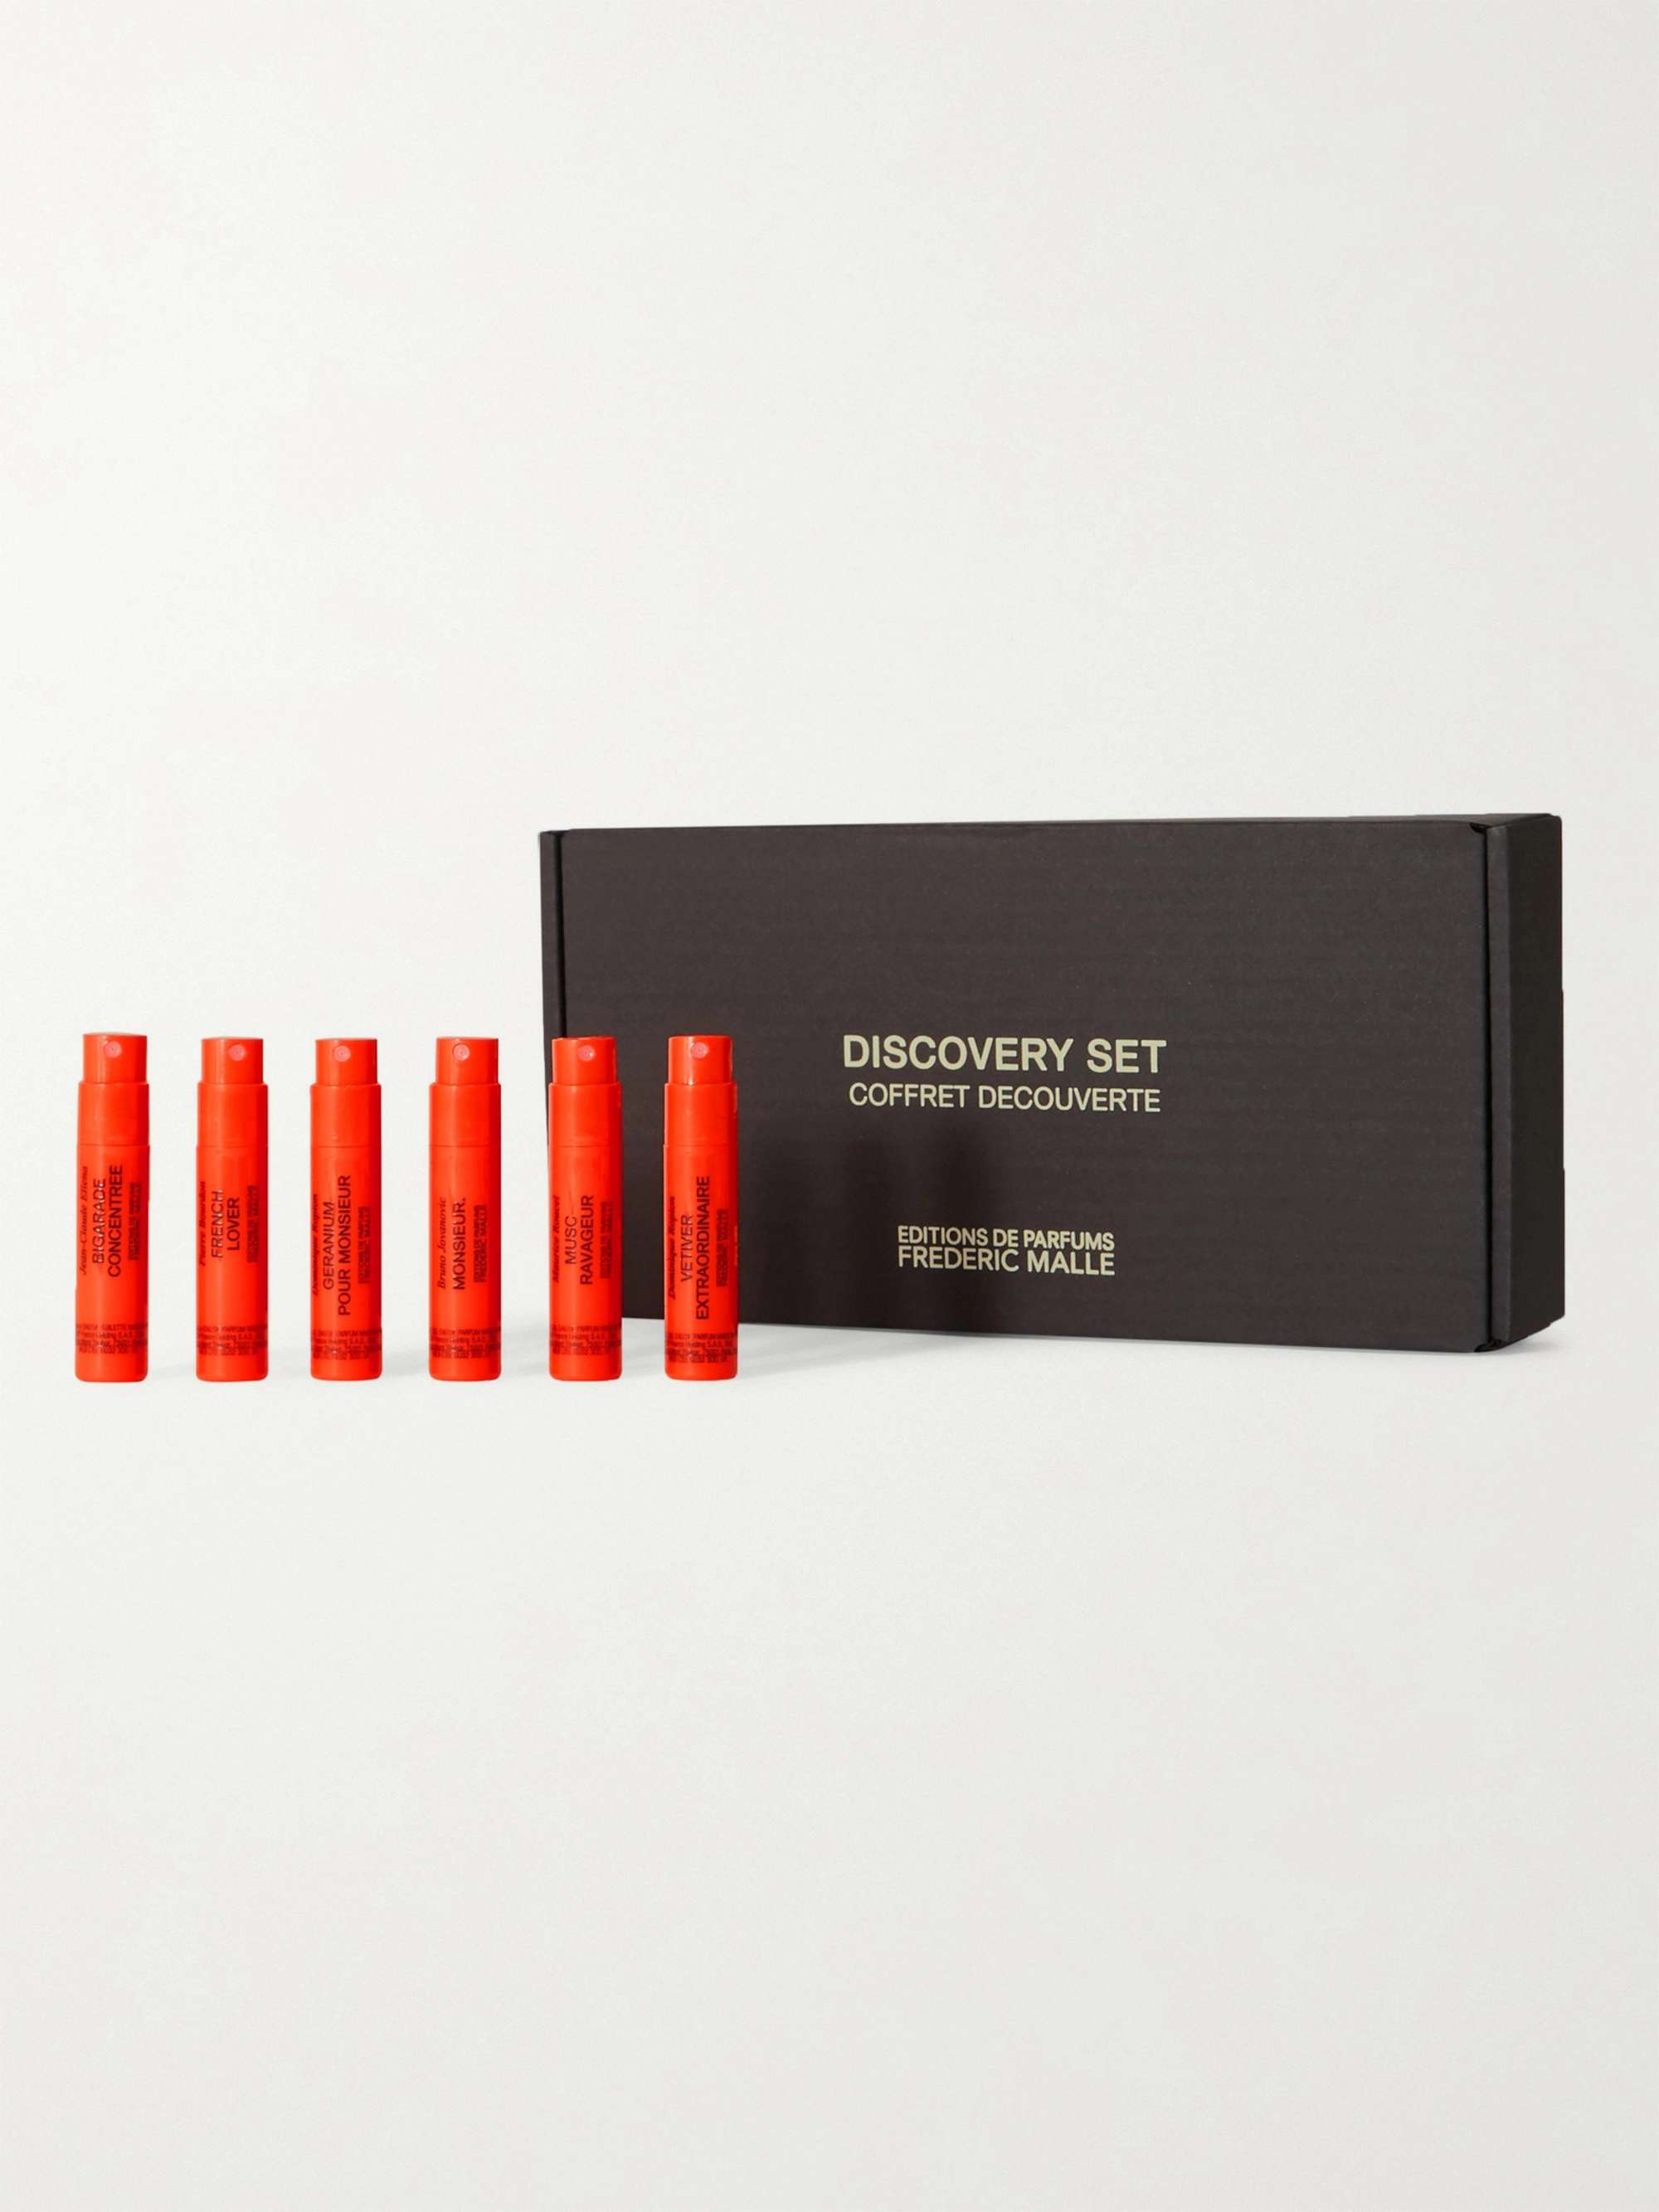 Frederic Malle Discovery Set, 6 x 1.2ml